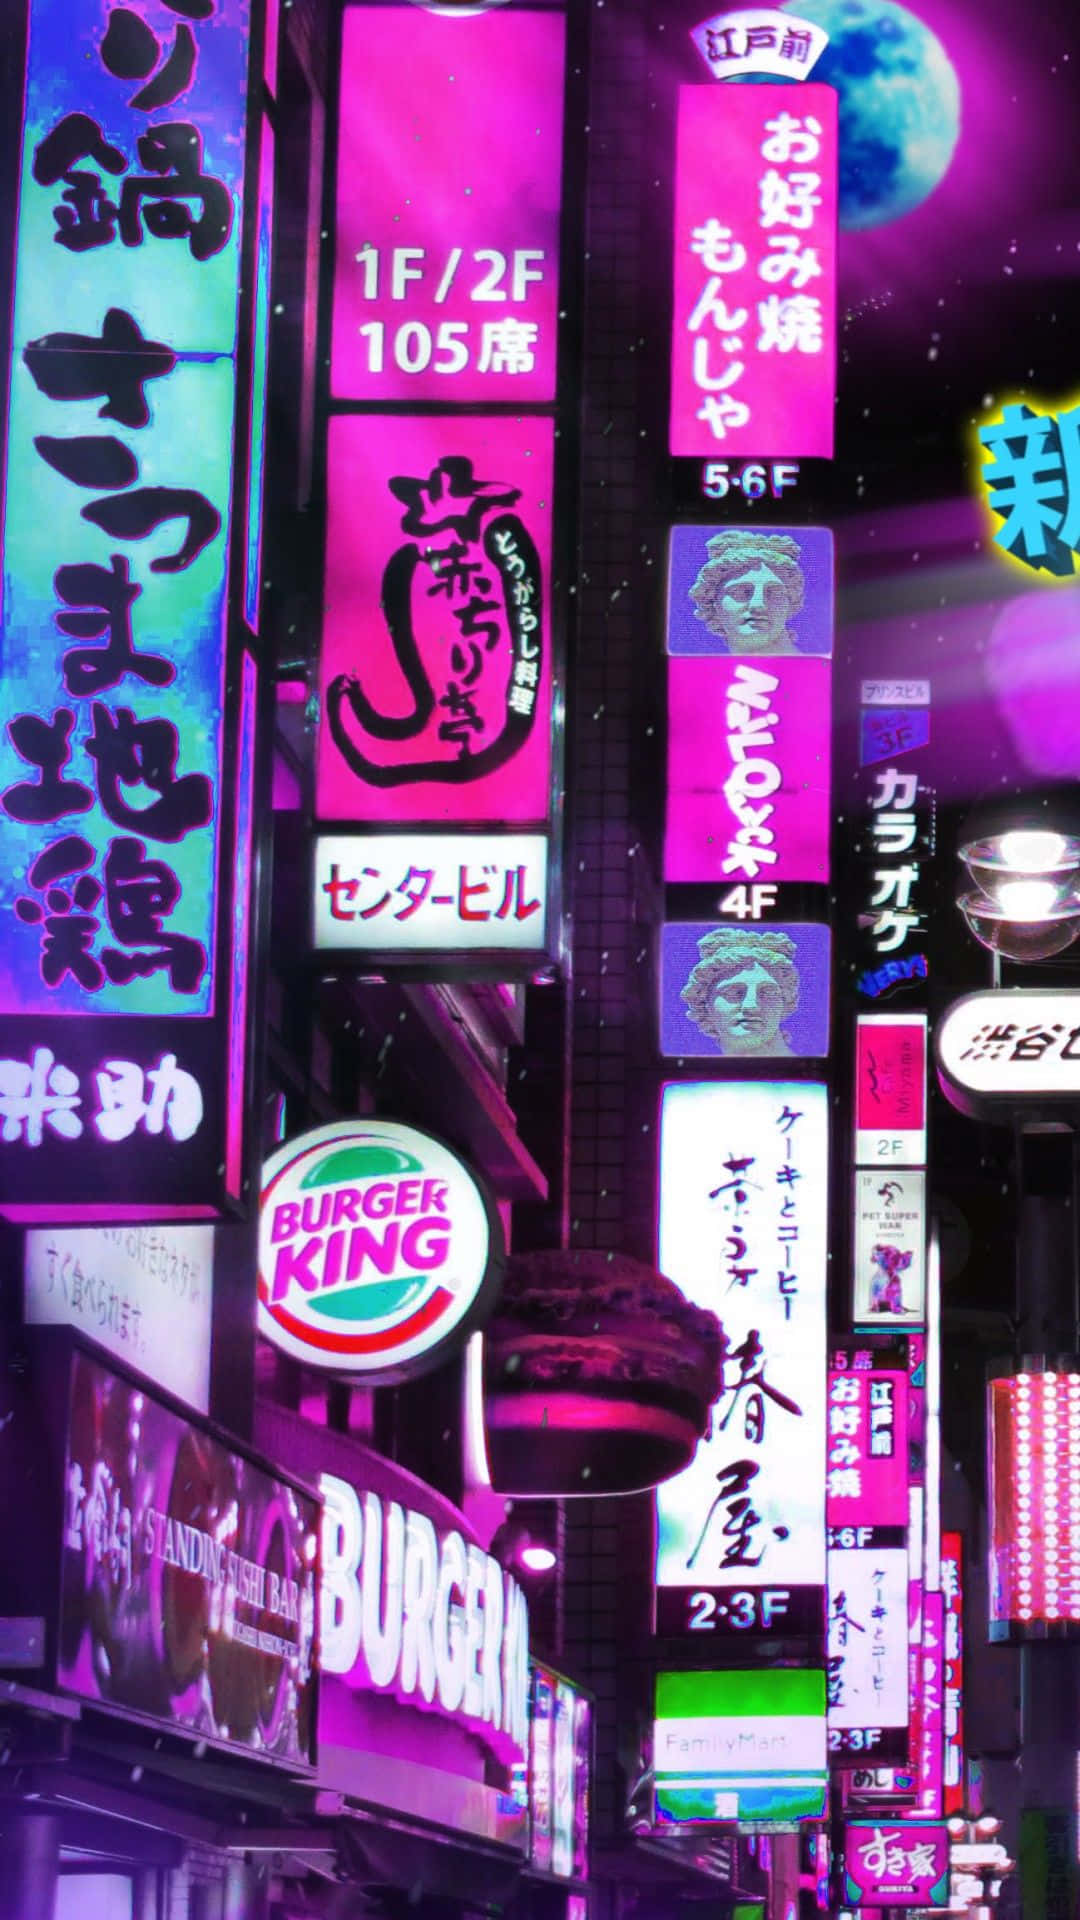 Get ready to explore the hypnotic and dreamy atmosphere of the Vaporwave Iphone Wallpaper